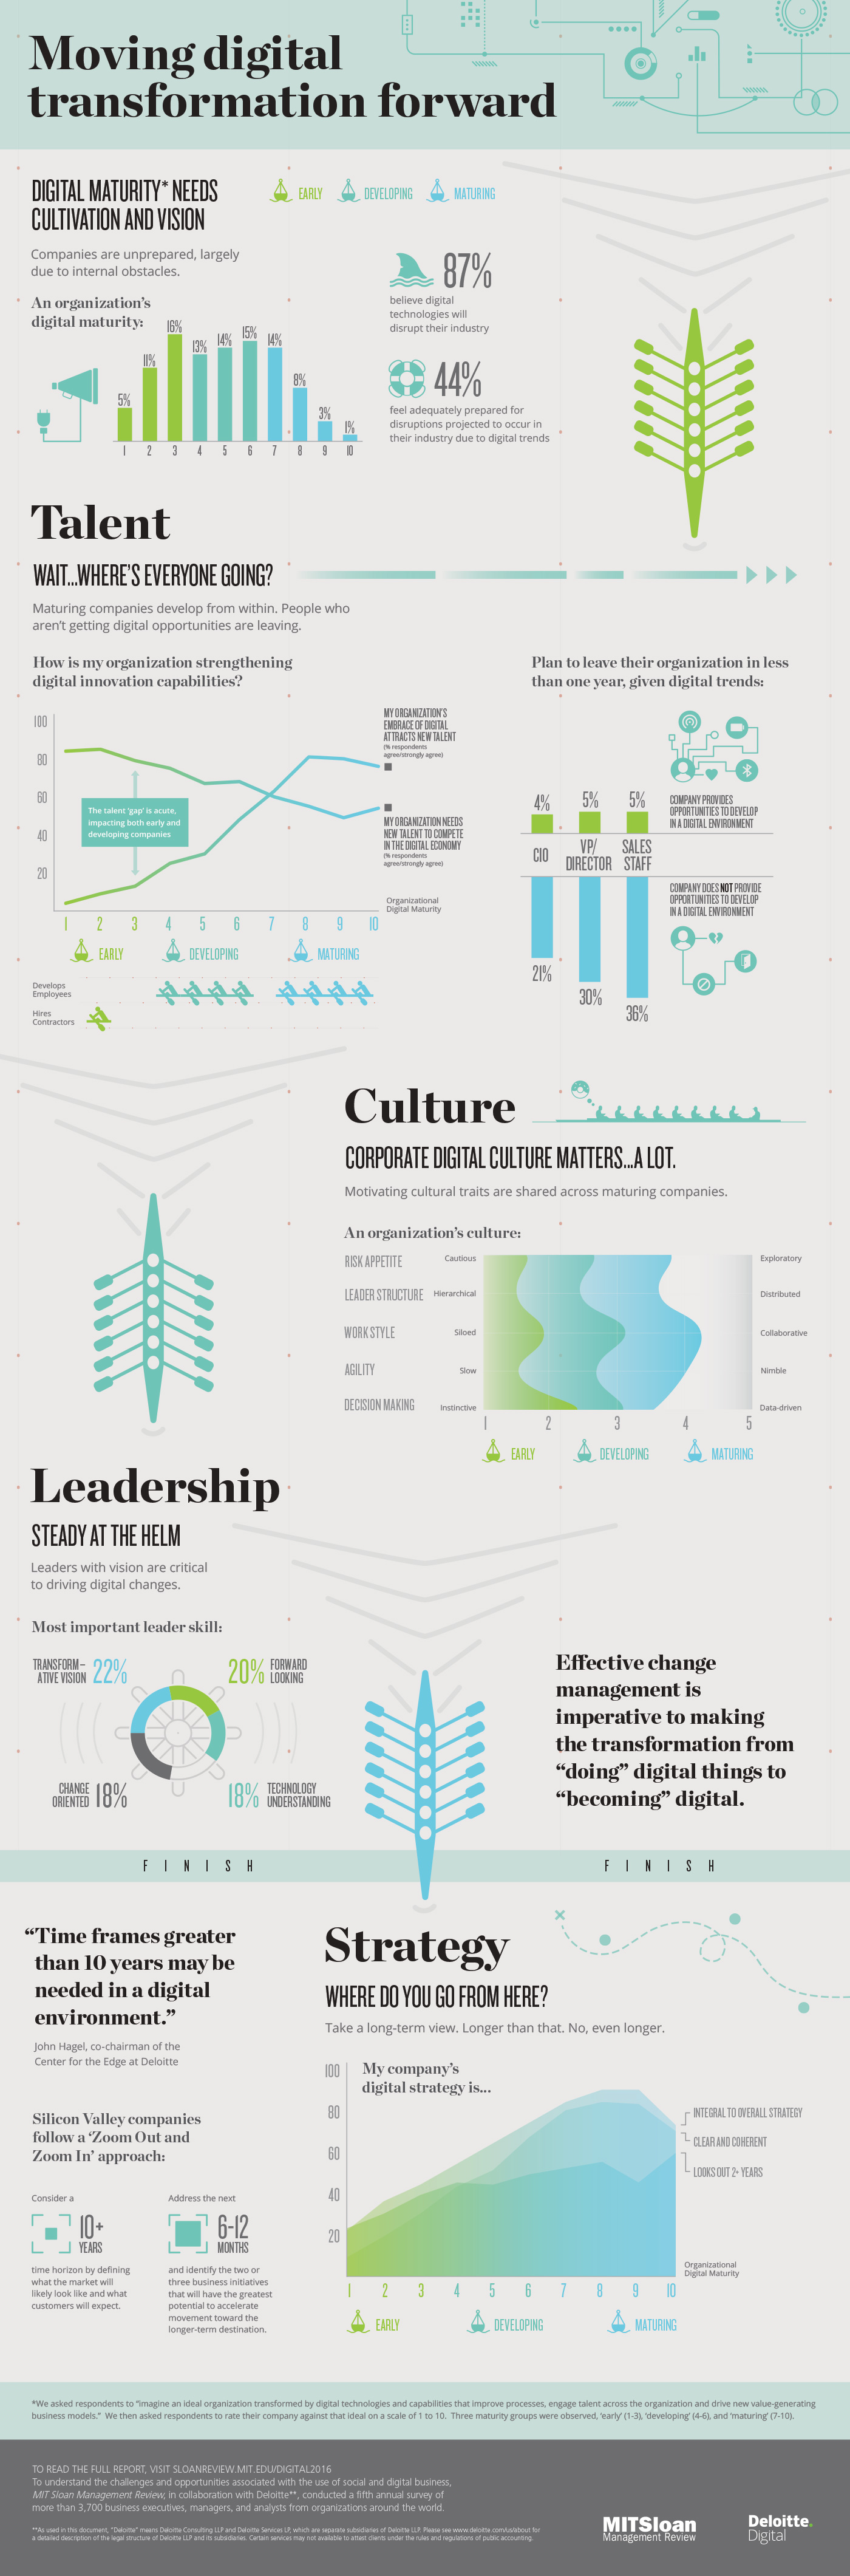 2016 Digital Business Report Infographic